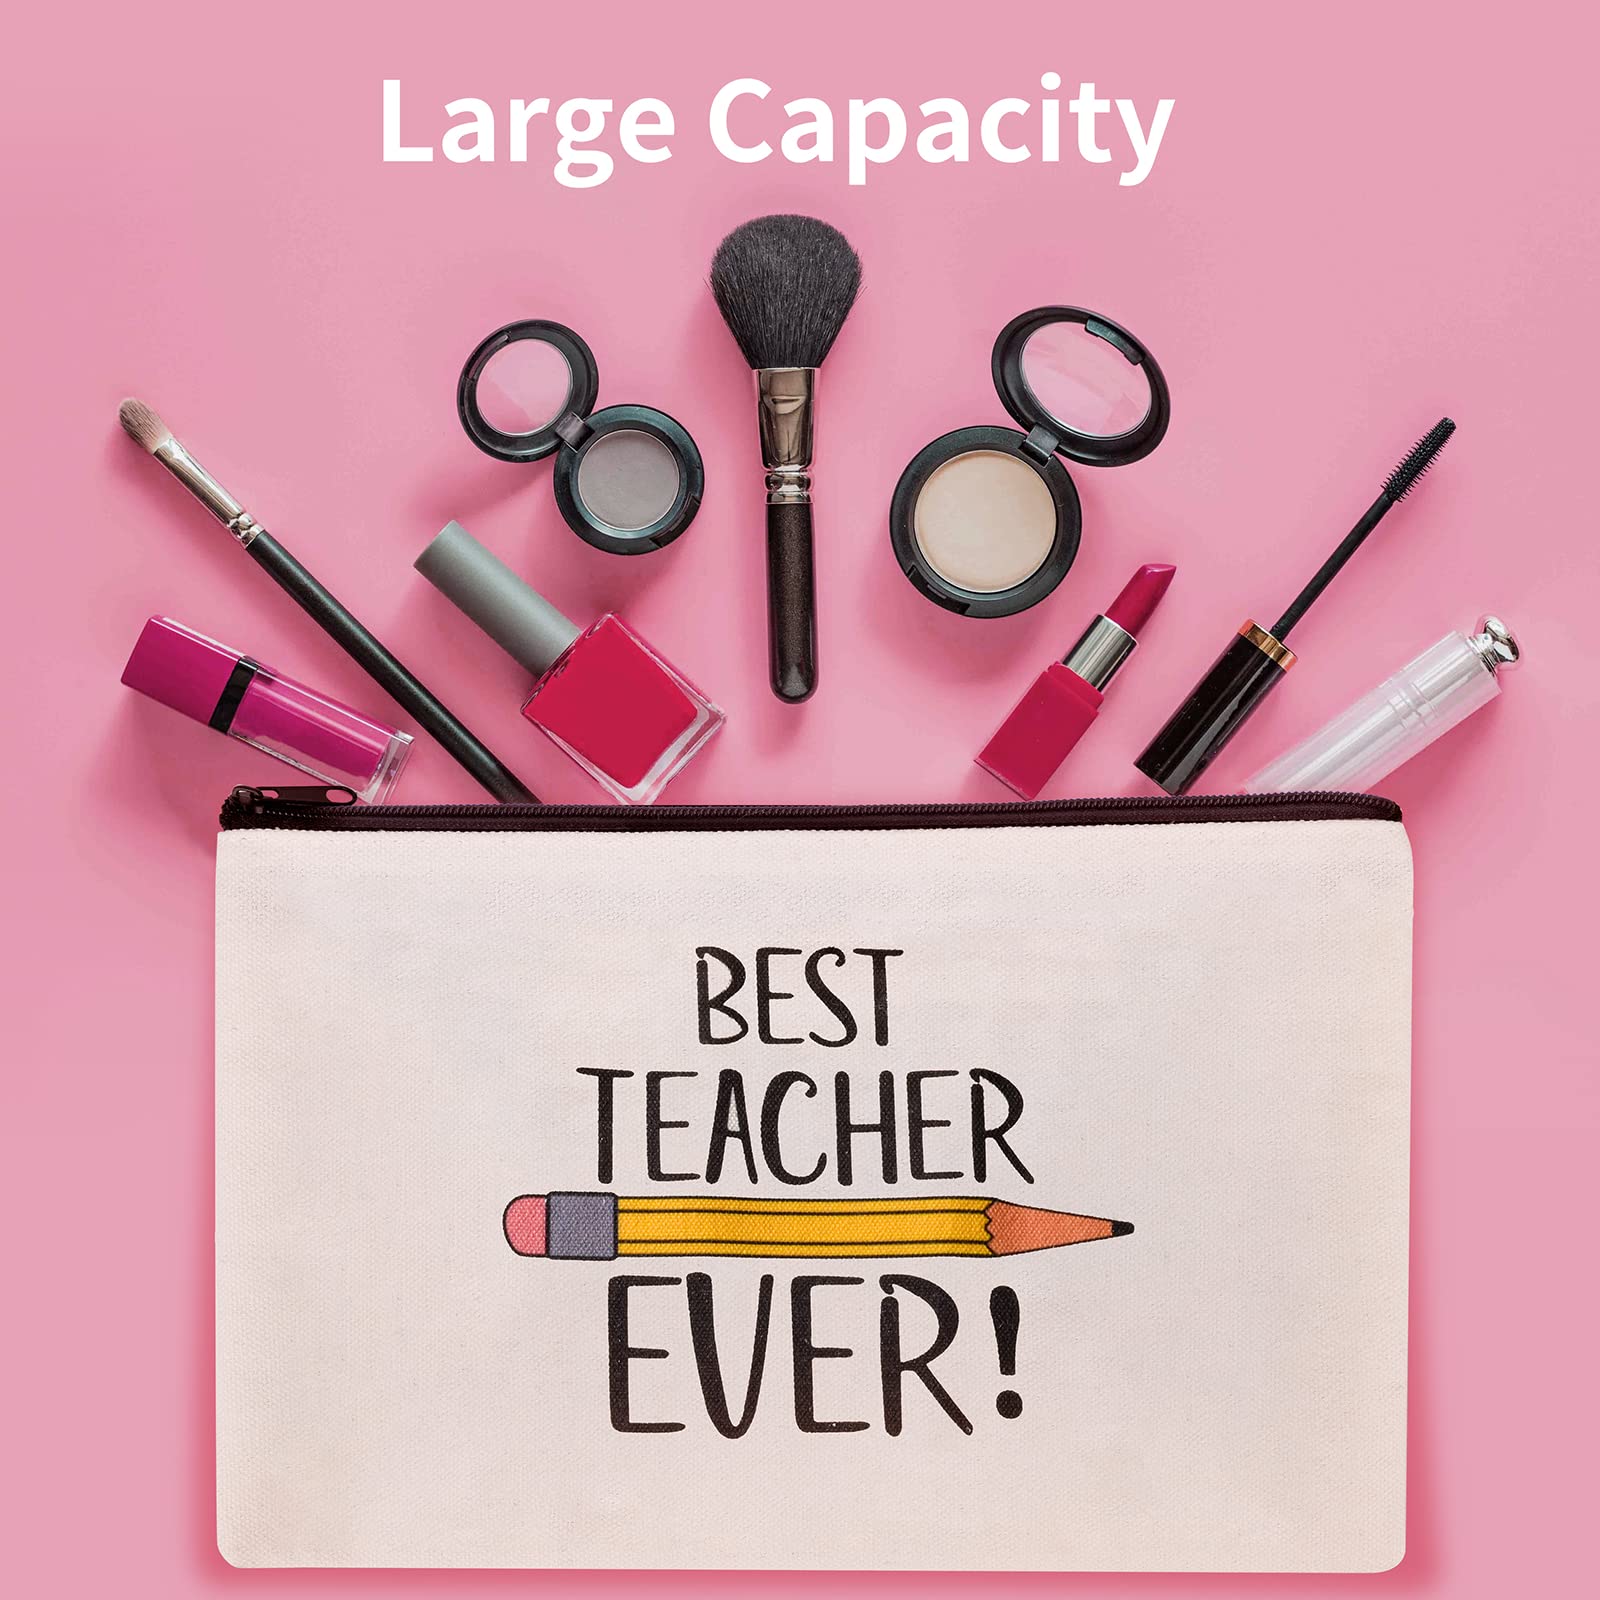 8 PCS Teacher Gifts Makeup Bags Cosmetic Travel Carrying Case Toiletry Pouch with Zipper in 2 Unique Designs, Graduation Teacher Appreciation Gifts